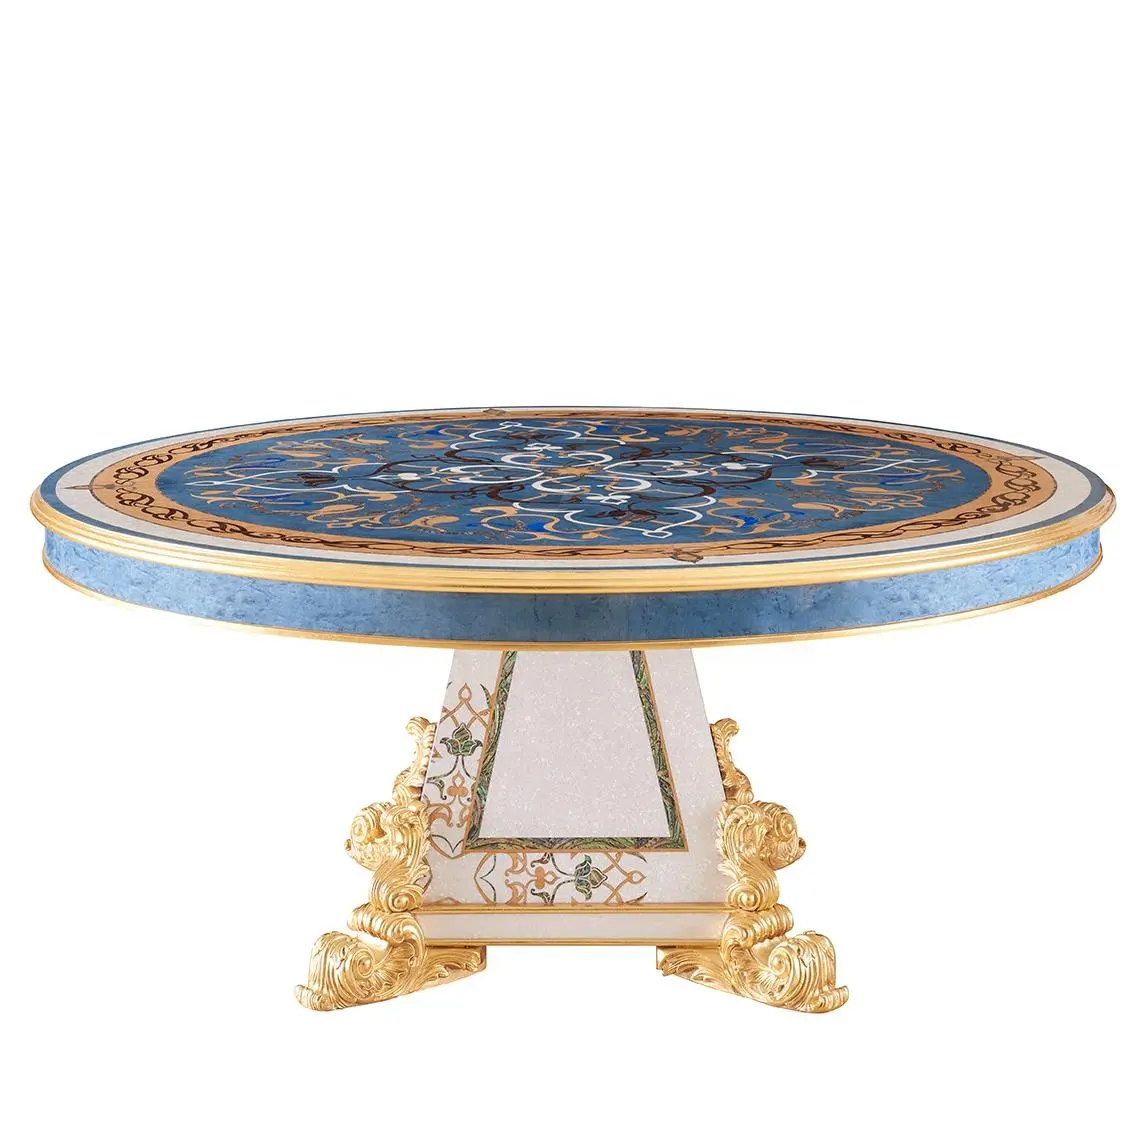 French hand painting Antique Solid Wood round shape white shell gold leaf 1.5 to 2.2m dining table for 6/8/10 chairs